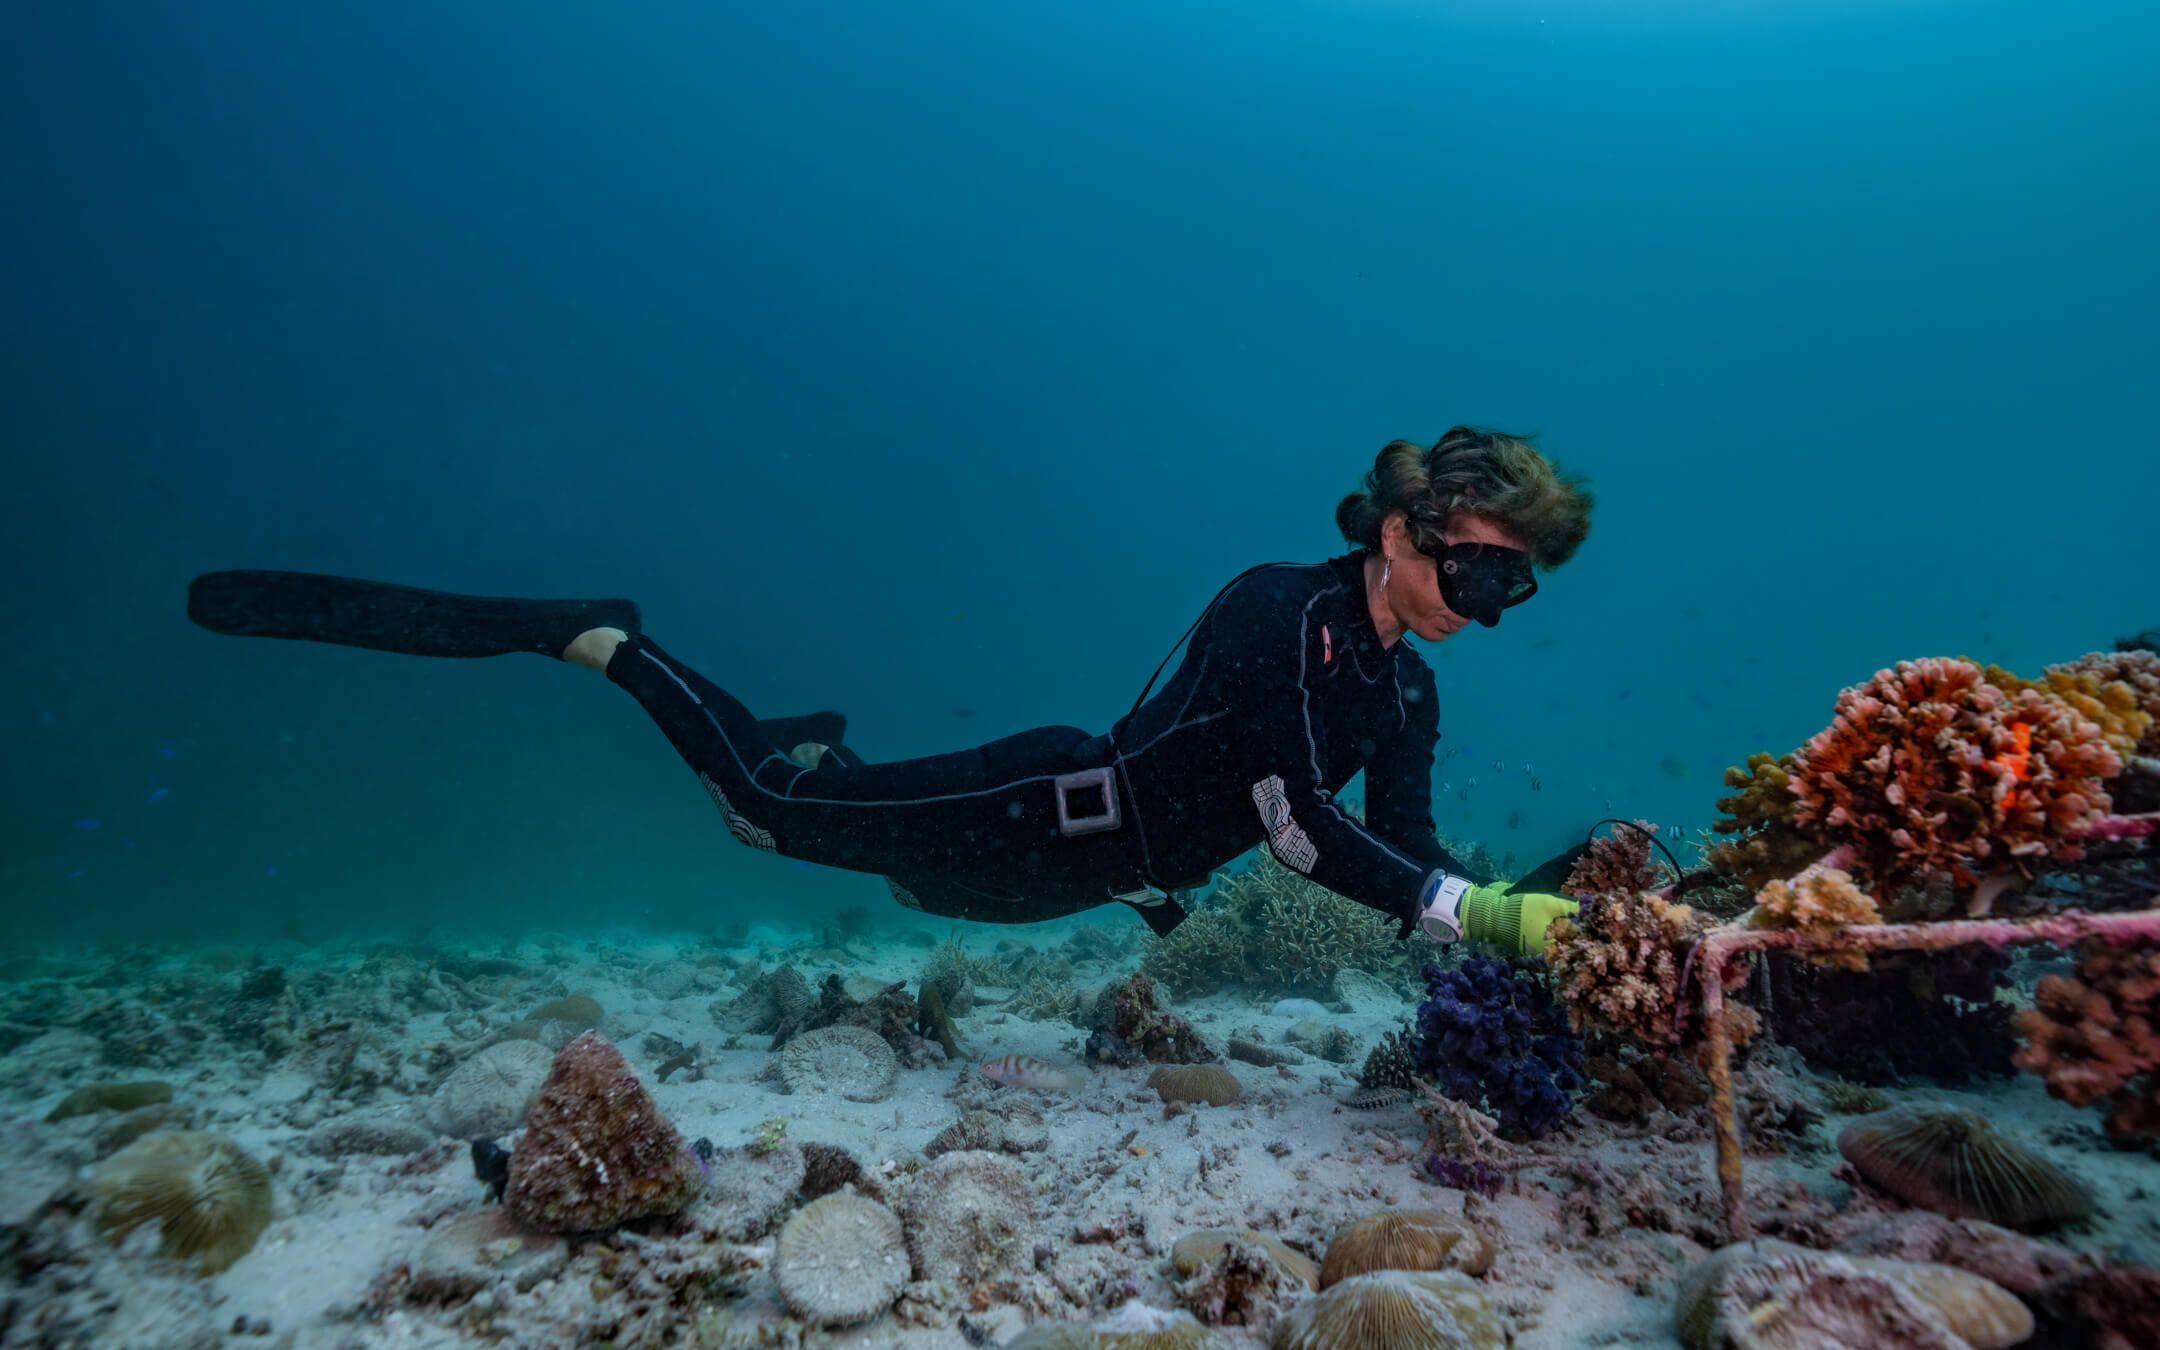 Rose Huizenga, founder of Coral Catch, checks on a young nursery, monitoring coral growth and health.
Photographer: Charlie Fenwick